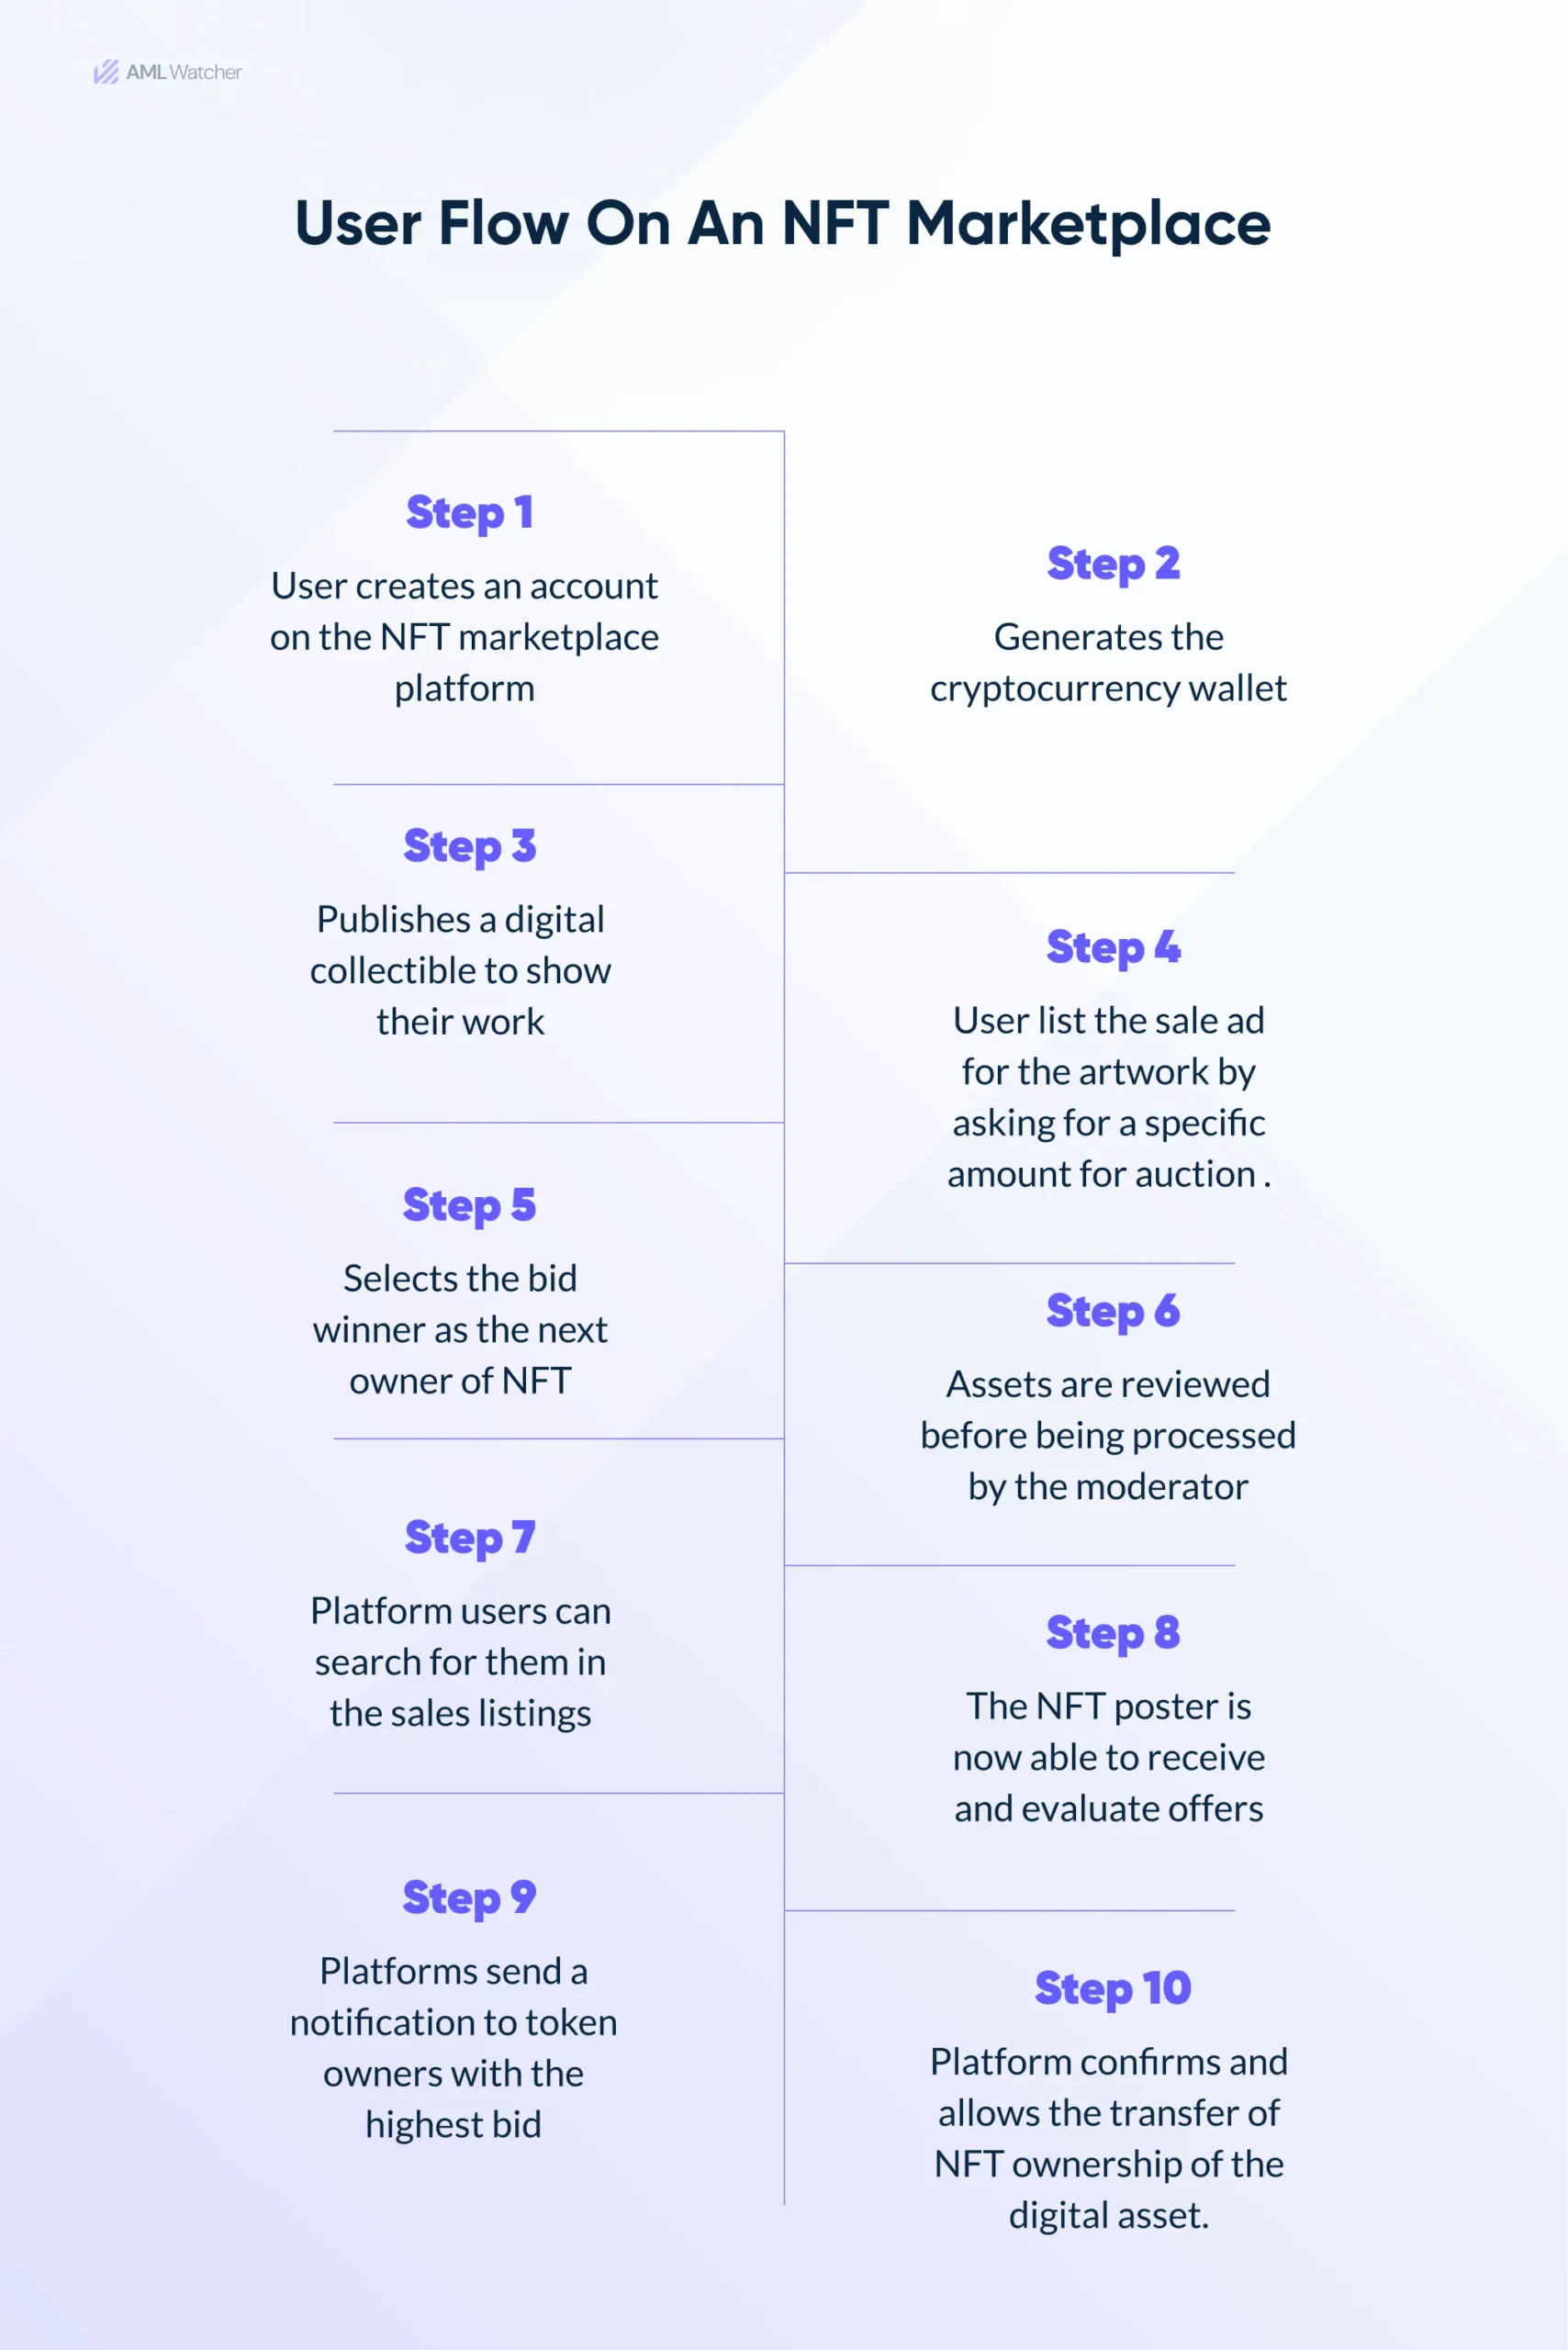 The image shows user flow on the NFT marketplace and how it works.